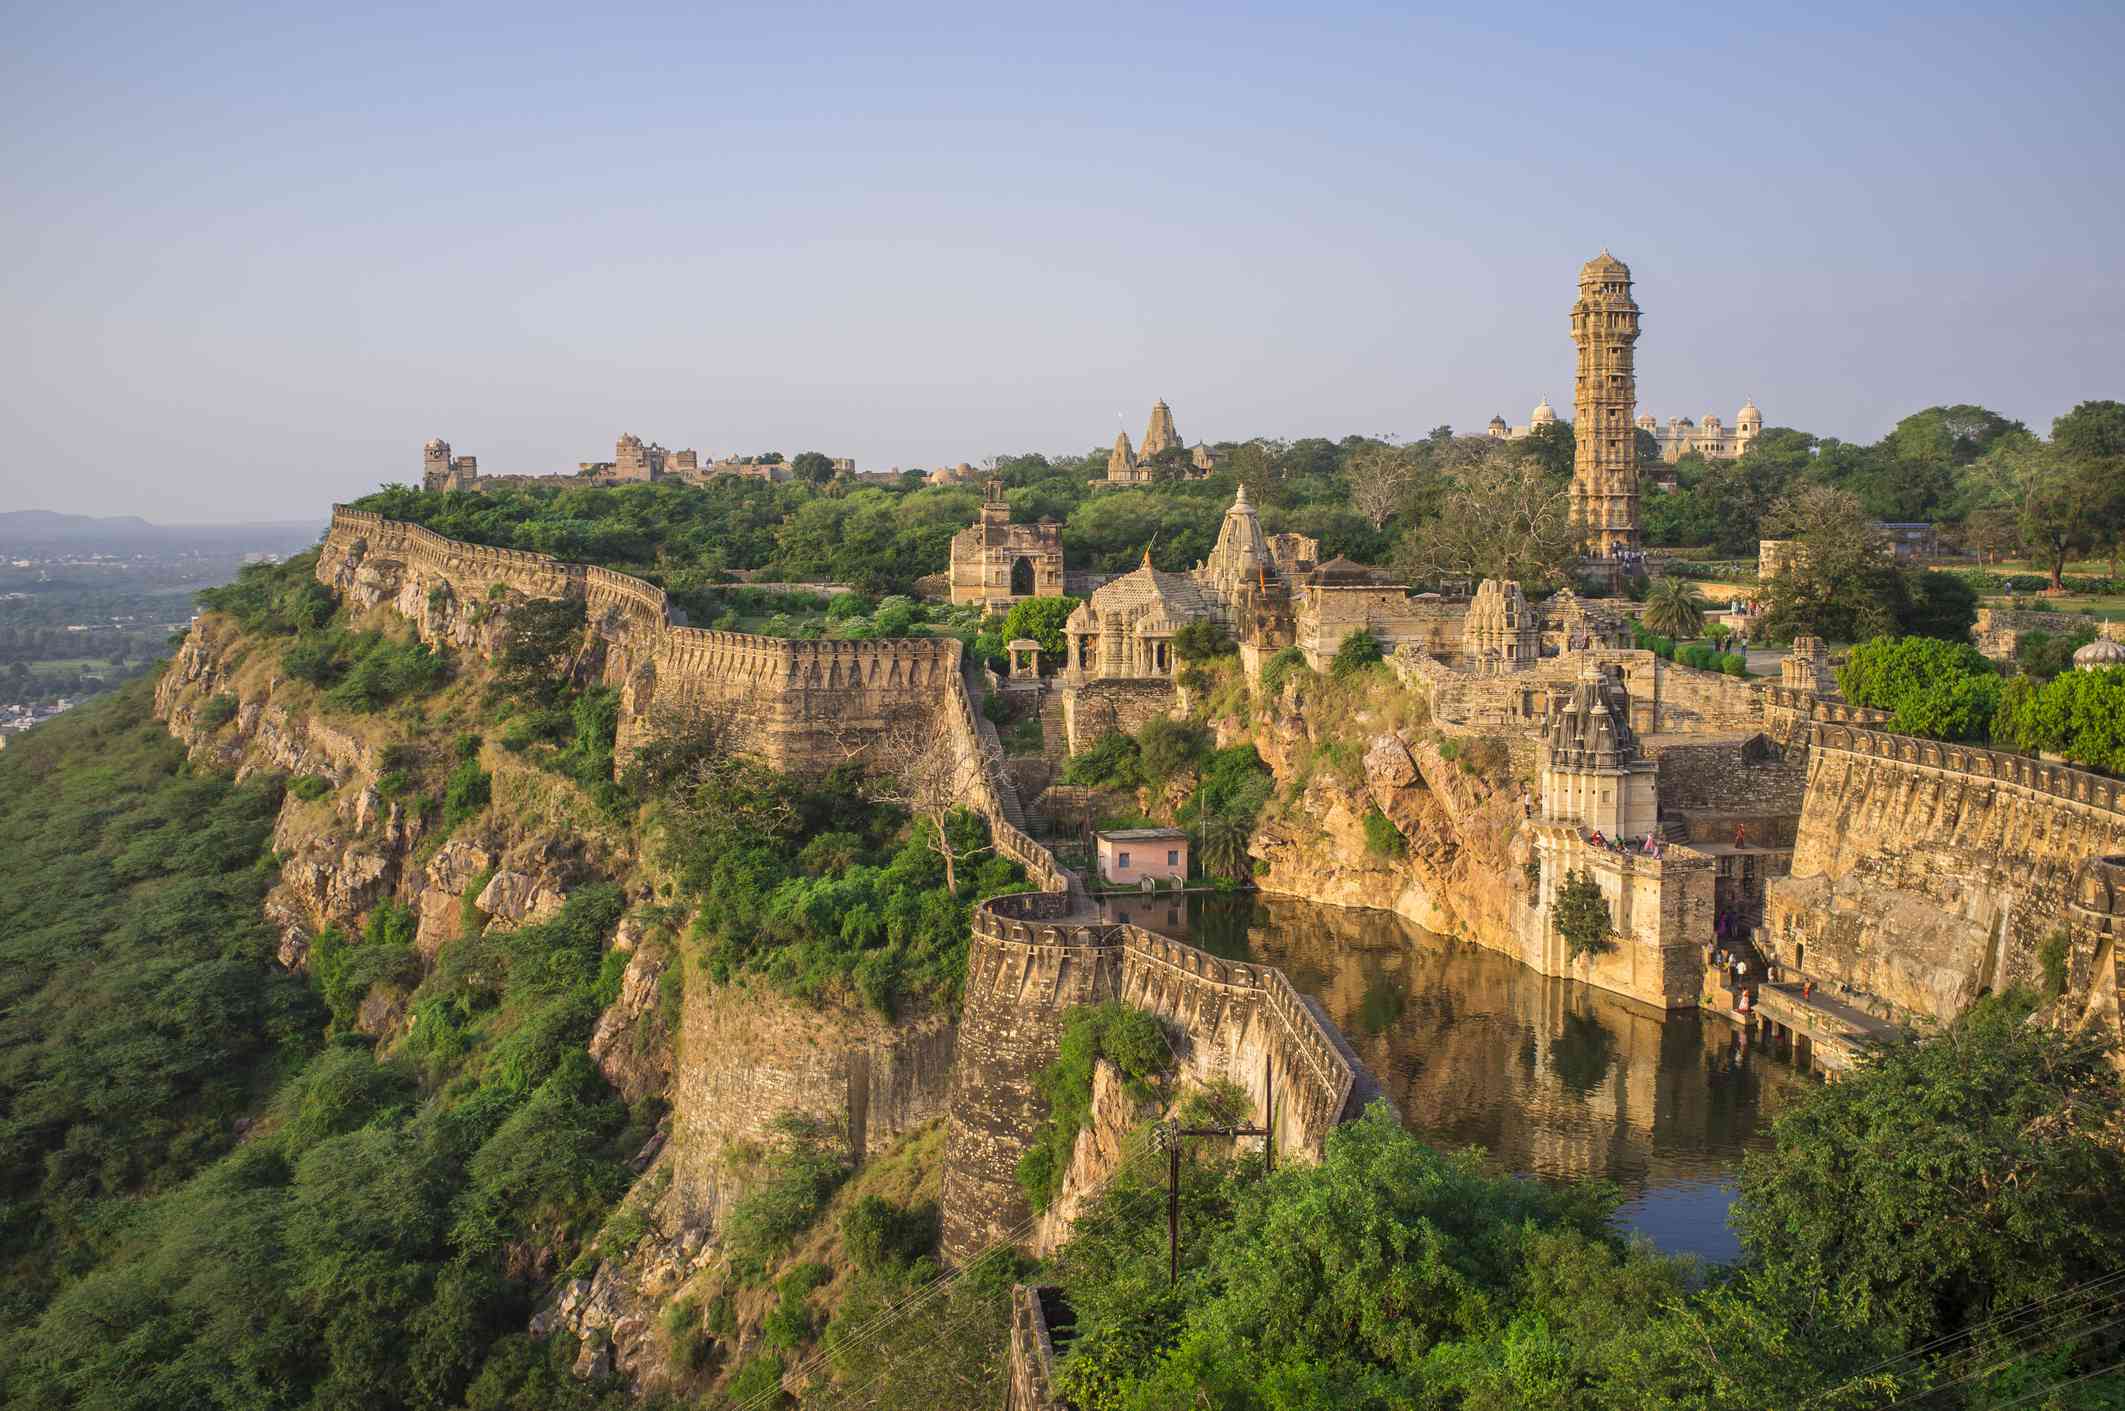 Chittorgarh fort overcame many sieges and battles which shows the bravery and resistance of the Rajput kingdom. It is a UNESCO World Heritage Site.